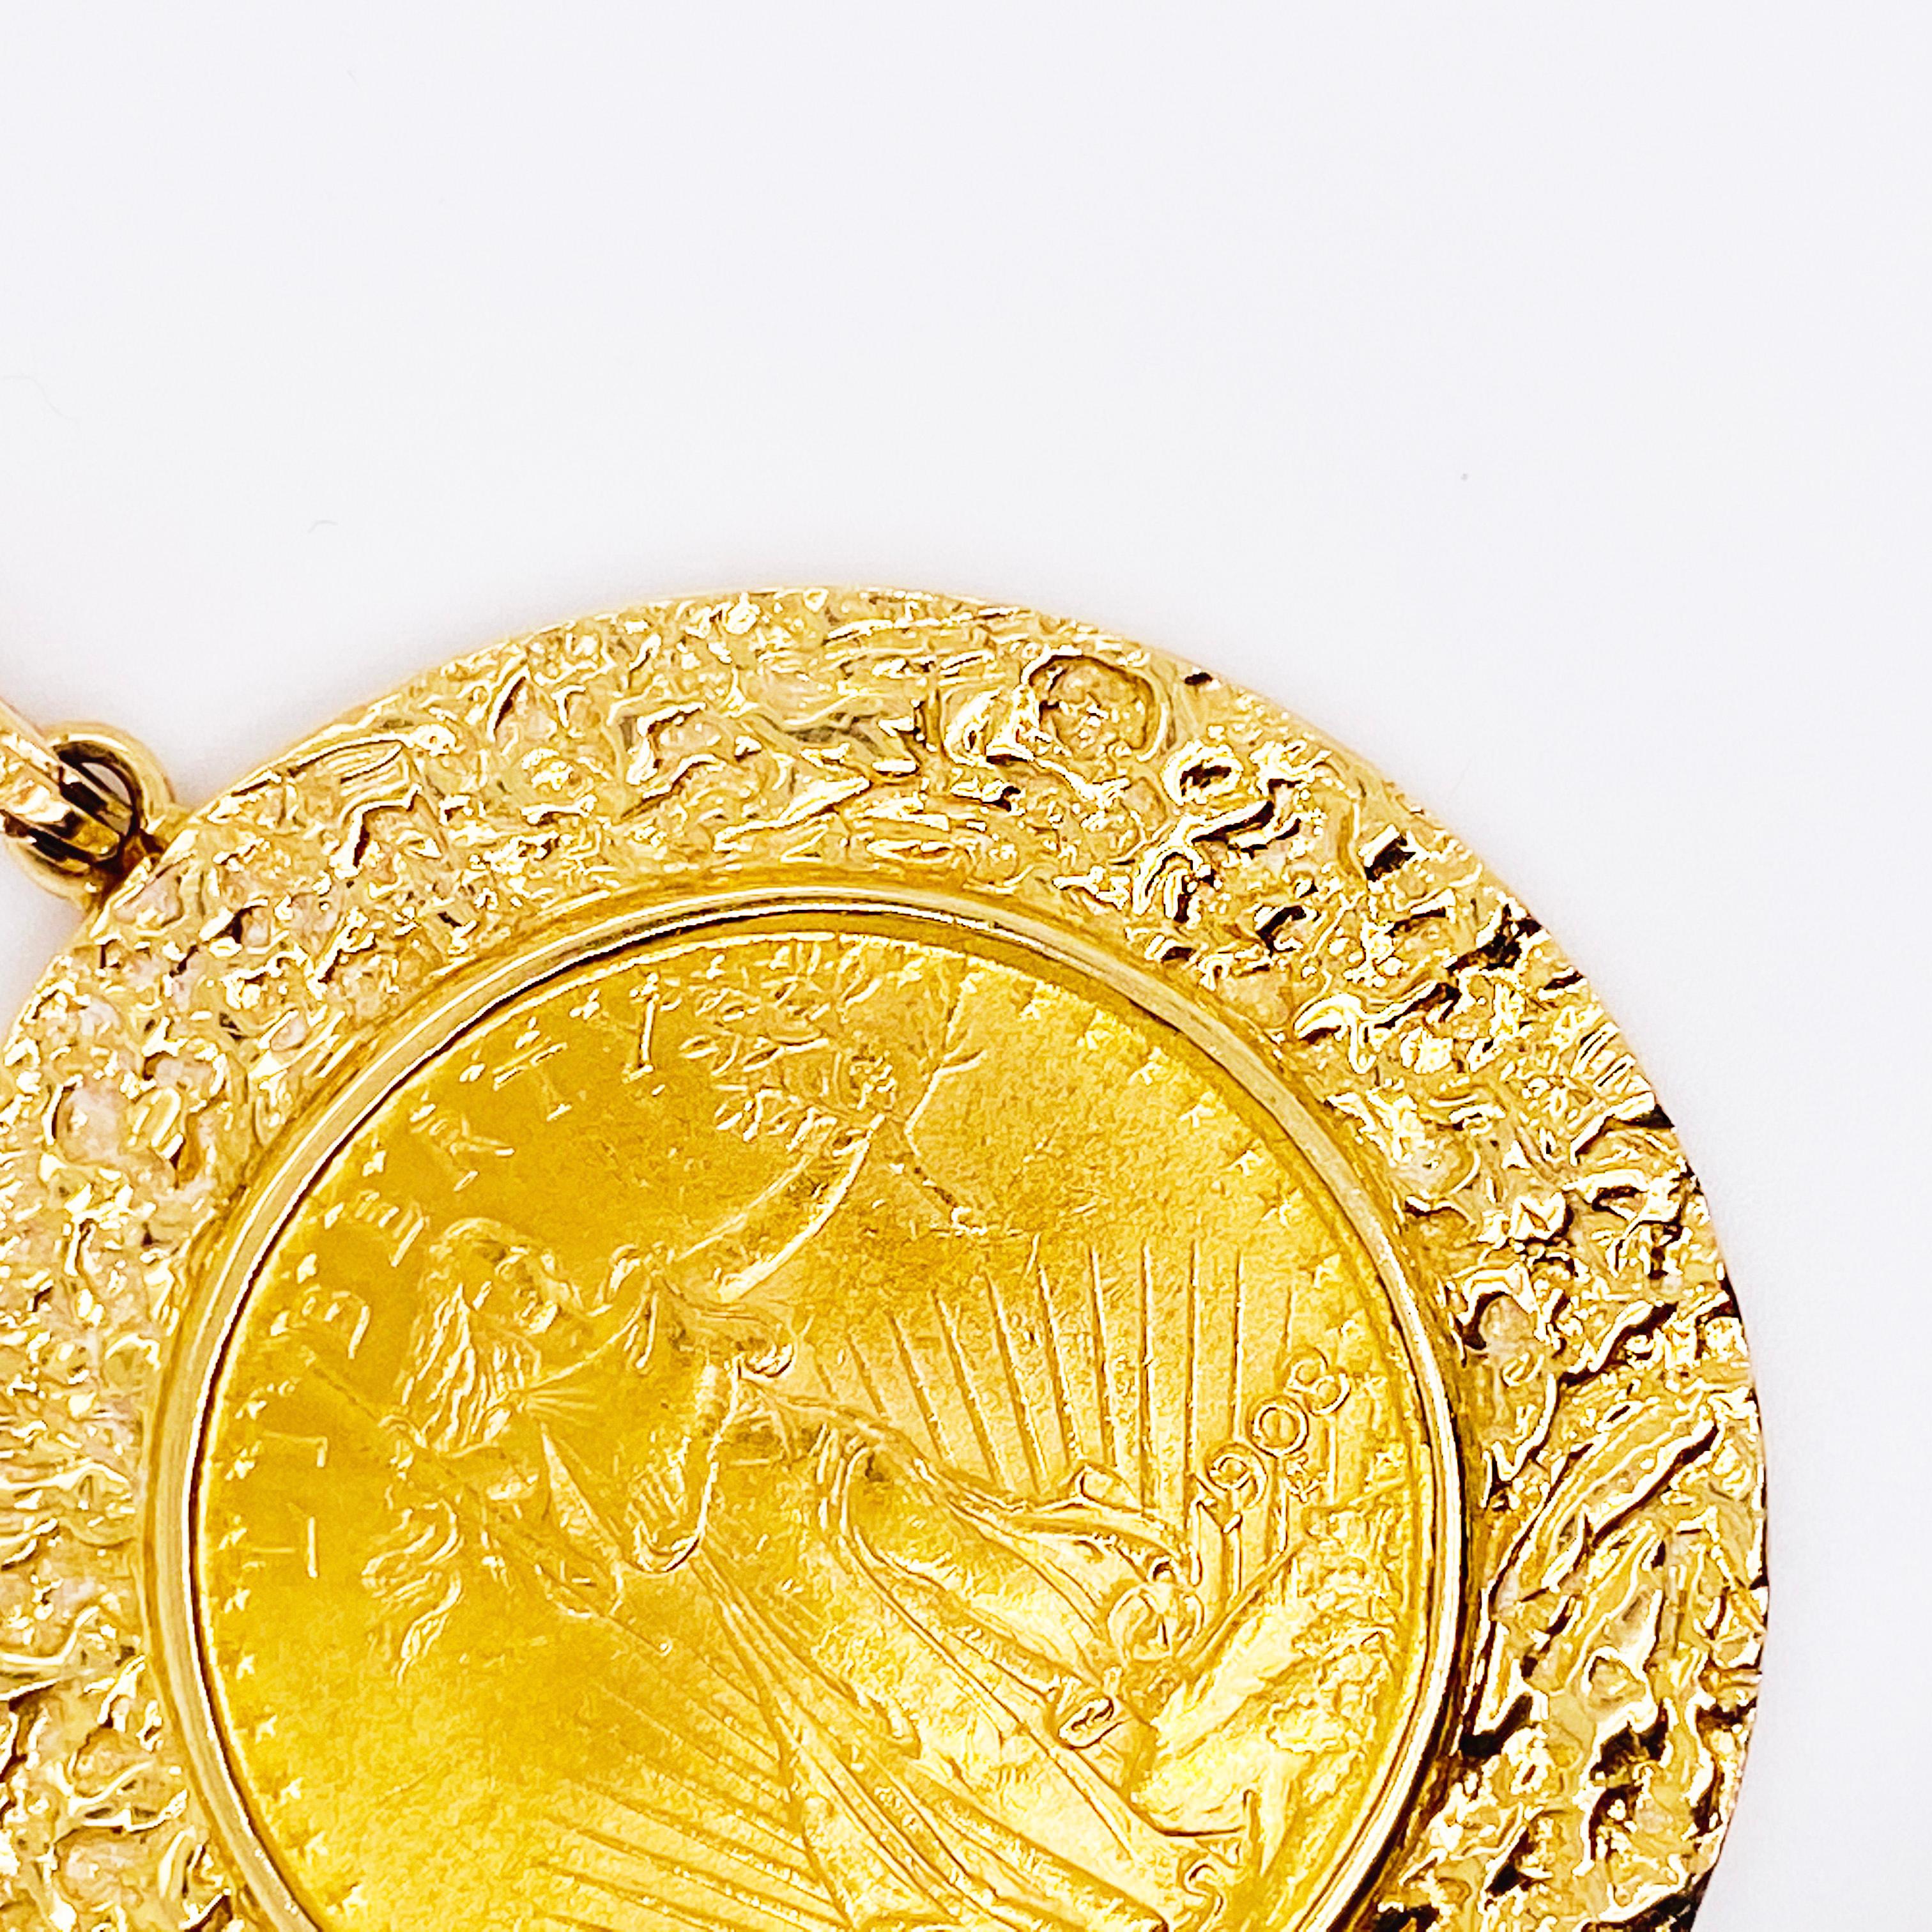 1 ounce genuine 1908 gold coin-US Lady Liberty 50 Dollar in Excellent condition with a solid 14 karat yellow gold custom made nugget gold bezel pendant.
61.7 Grams Total
2.5 Inches Long by 2 Inches Wide

1908 Lady Liberty Coin
